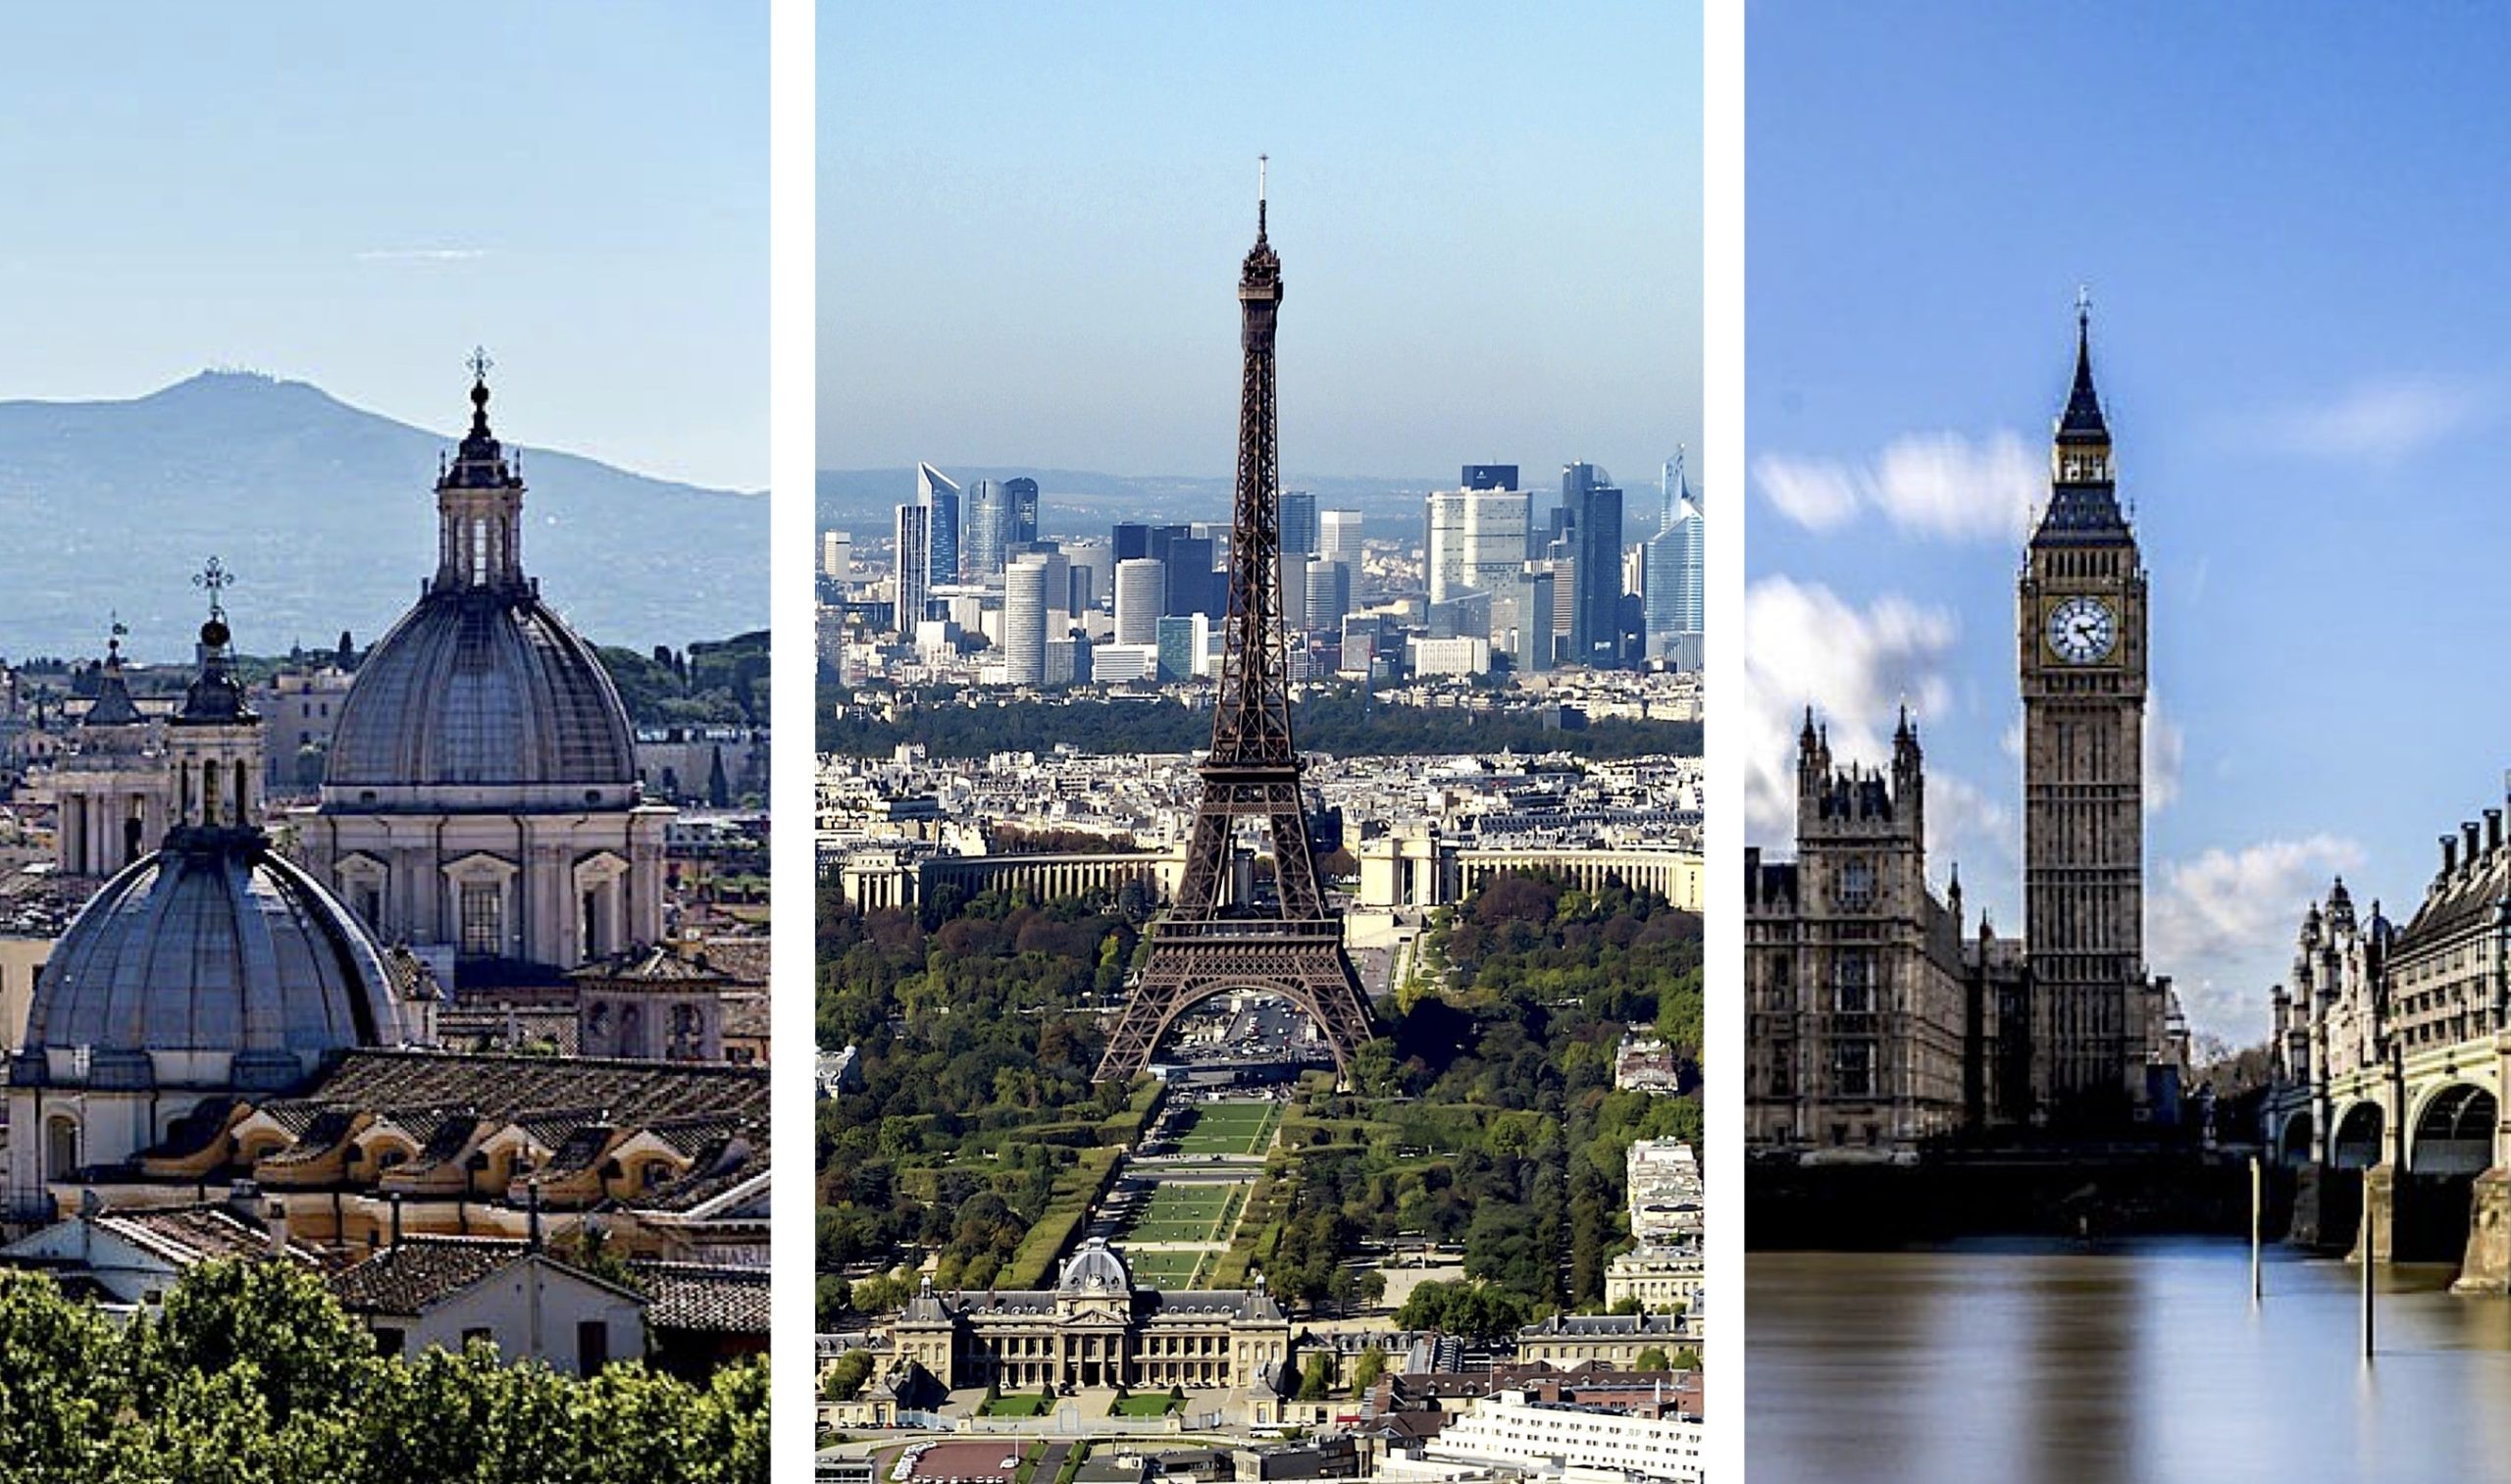 Paris, London, Rome. How much does it cost moving there?